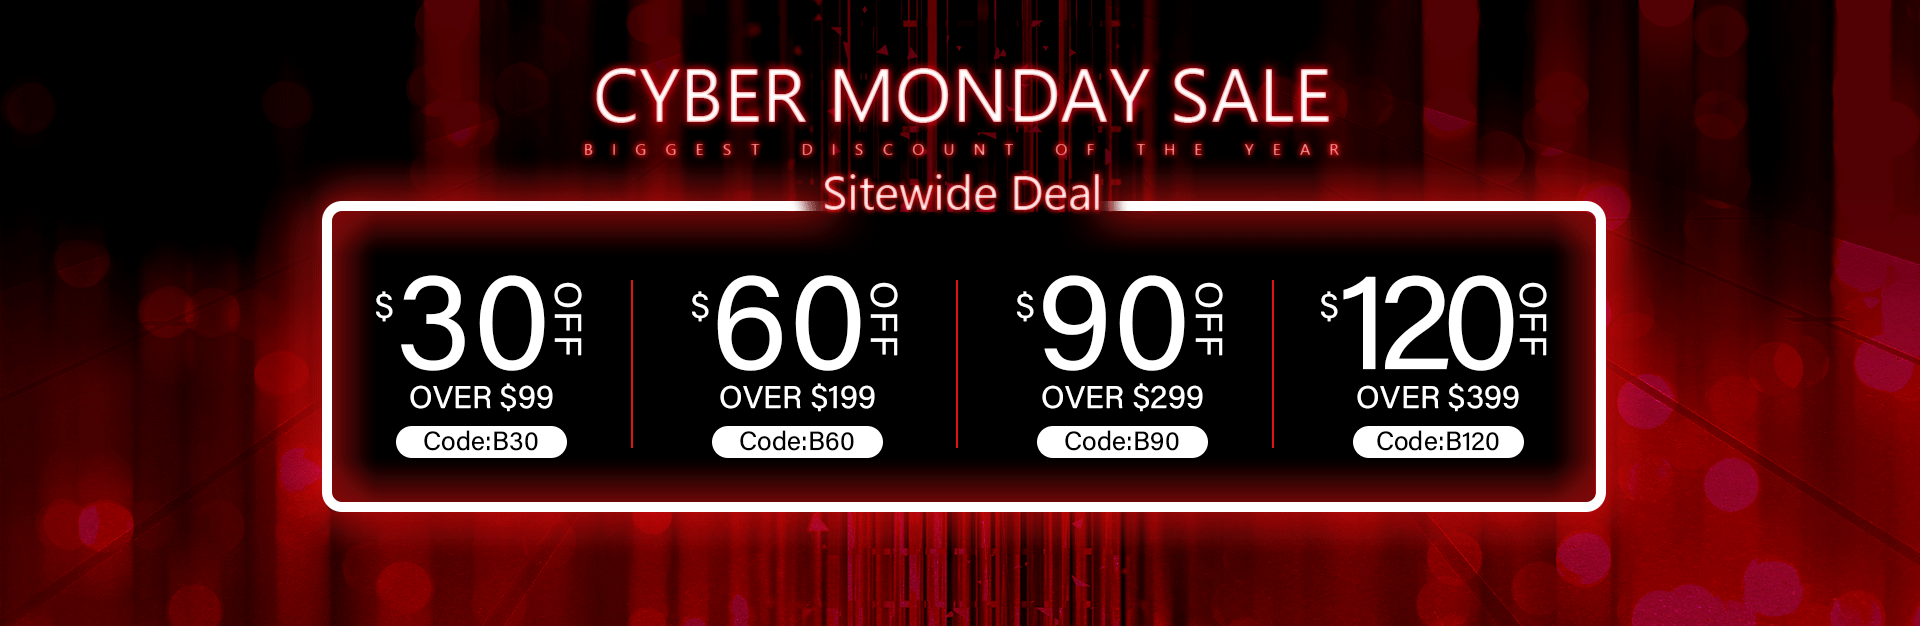 cyber monday $120 off (2)